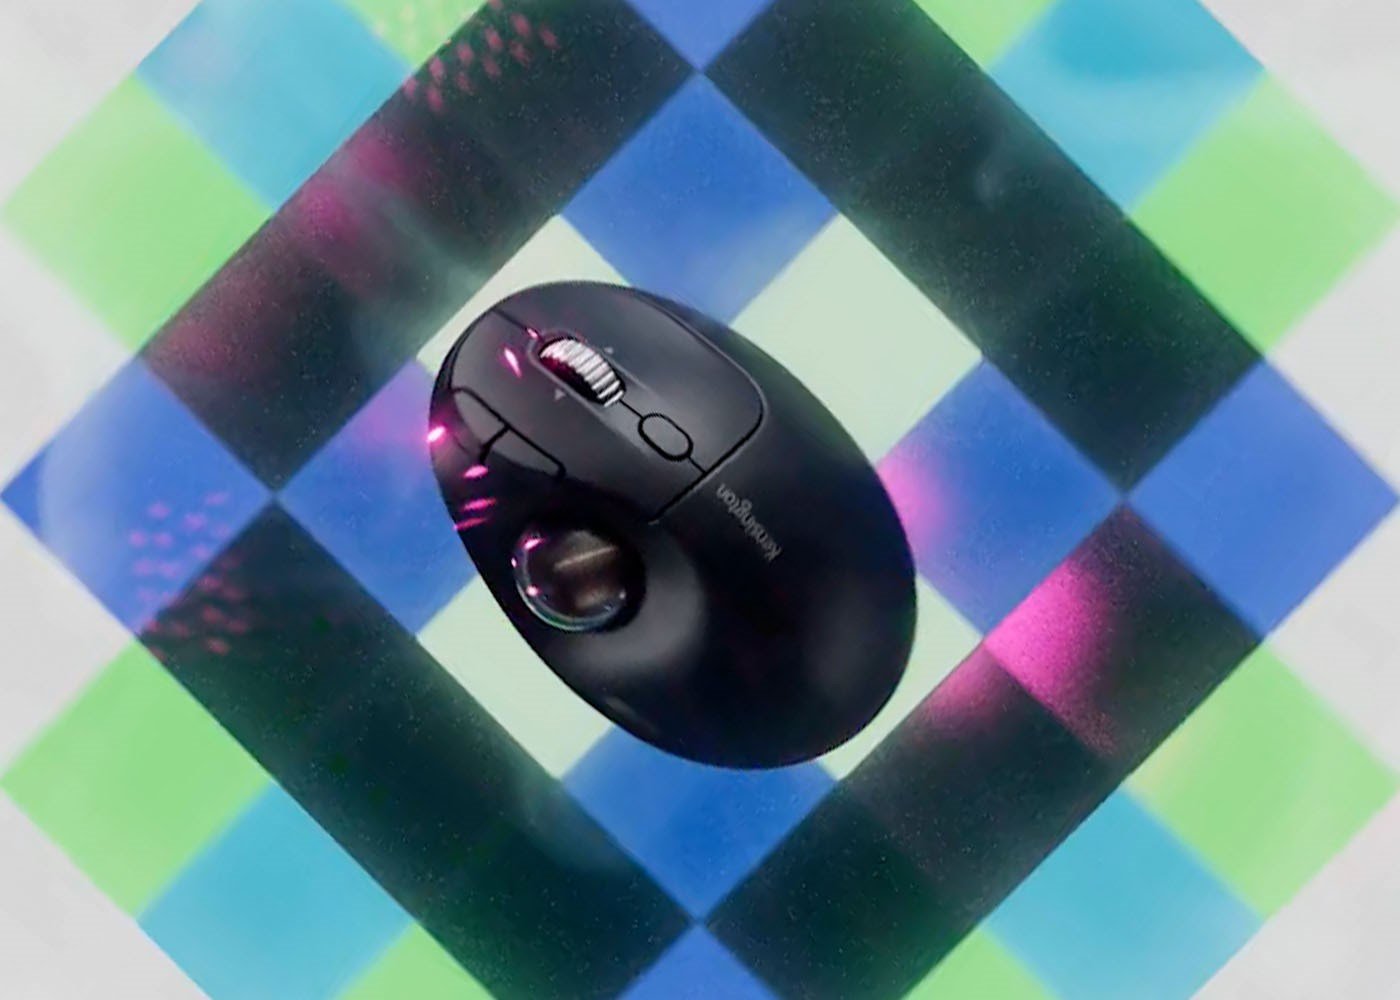 Top view of a trackball on multicolored squares.